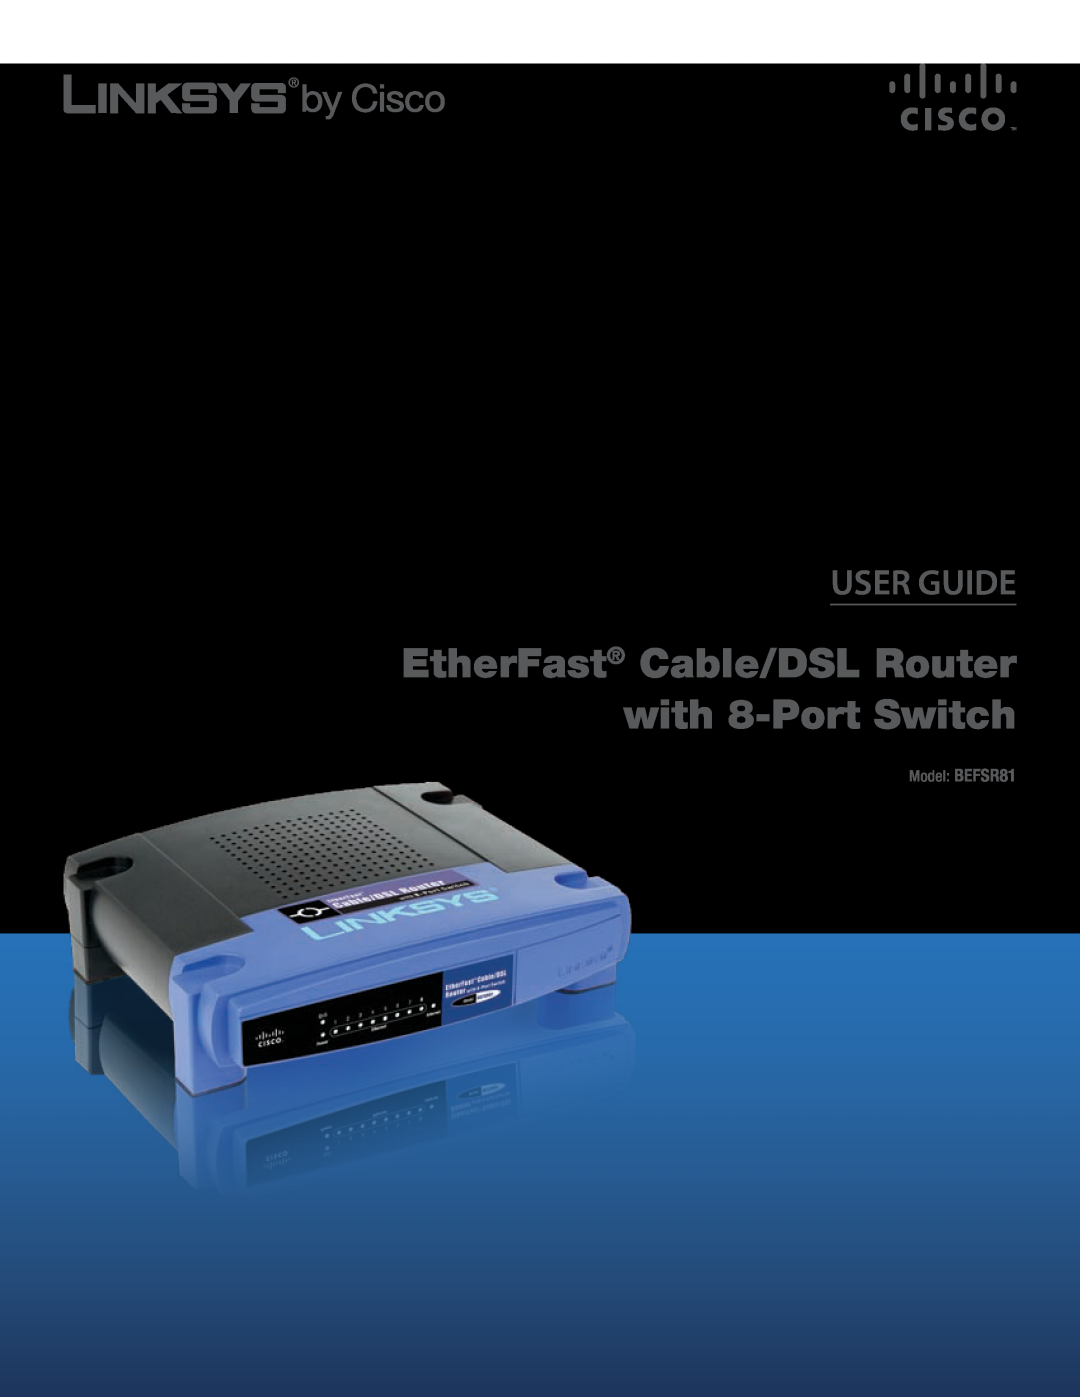 Cisco Systems manual EtherFast Cable/DSL Router with 8-Port Switch, User Guide, Model BEFSR81 